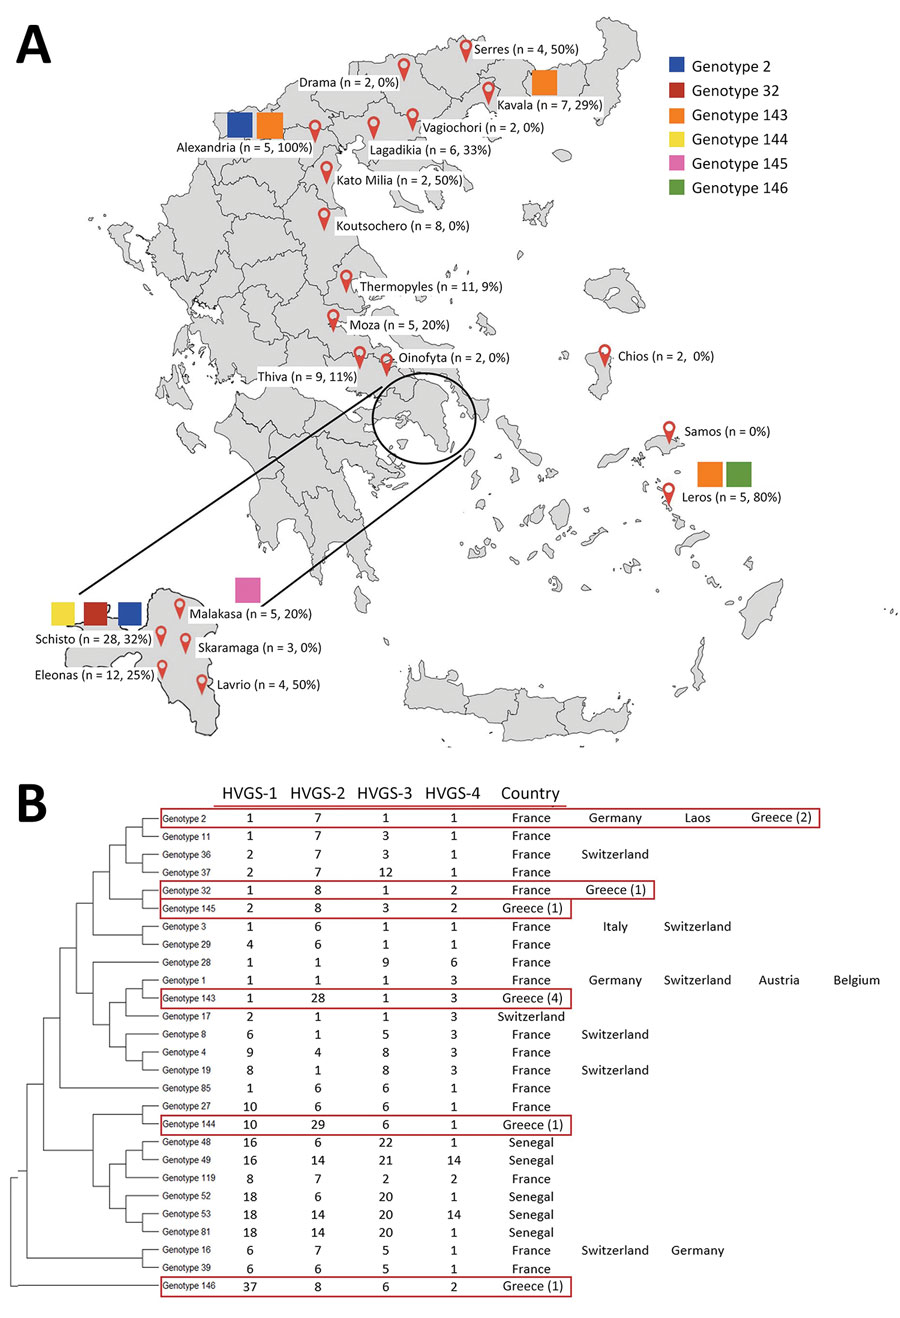 Results of stool sample tests for Tropheryma whipplei from migrant children 0–12 years of age from 20 hotspots throughout Greece. A) Defined hotspots throughout Greece, showing numbers and percentages of T. whipplei recovered from each location and distribution of different genotypes. B) Phylogenetic diversity of 6 genotypes of T. whipplei obtained from migrants (red boxes). Phylogenetic tree was constructed by using the maximum-likelihood method based on the Tamura 3-parameter substitution model. Sequences from the 4 HVGSs were concatenated. Noted next to the genotypes are the countries in which they have been previously detected. Numbers in parentheses note positive test results for children based on each genotype found in Greece. HVGS, highly variable genomic sequence.